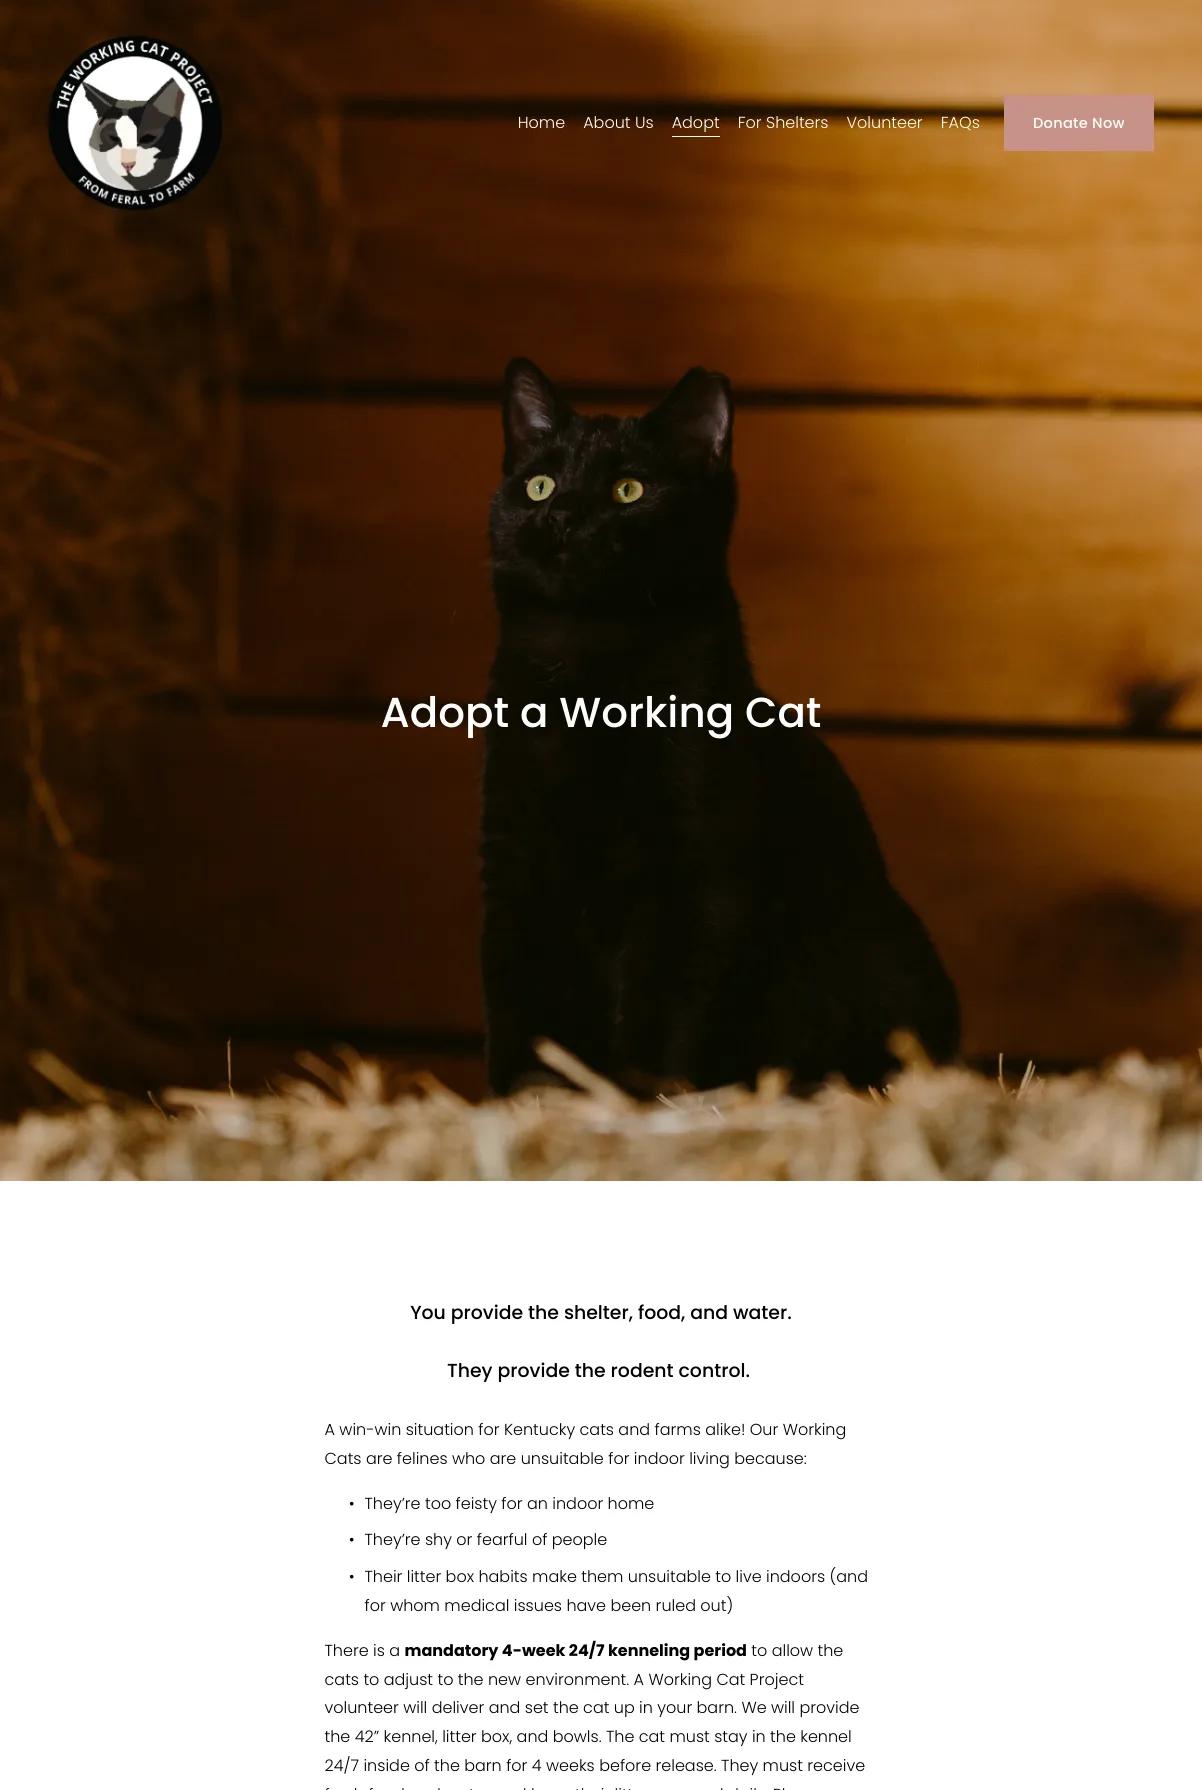 Screenshot 3 of The Working Cat Project (Example Squarespace Nonprofit Website)